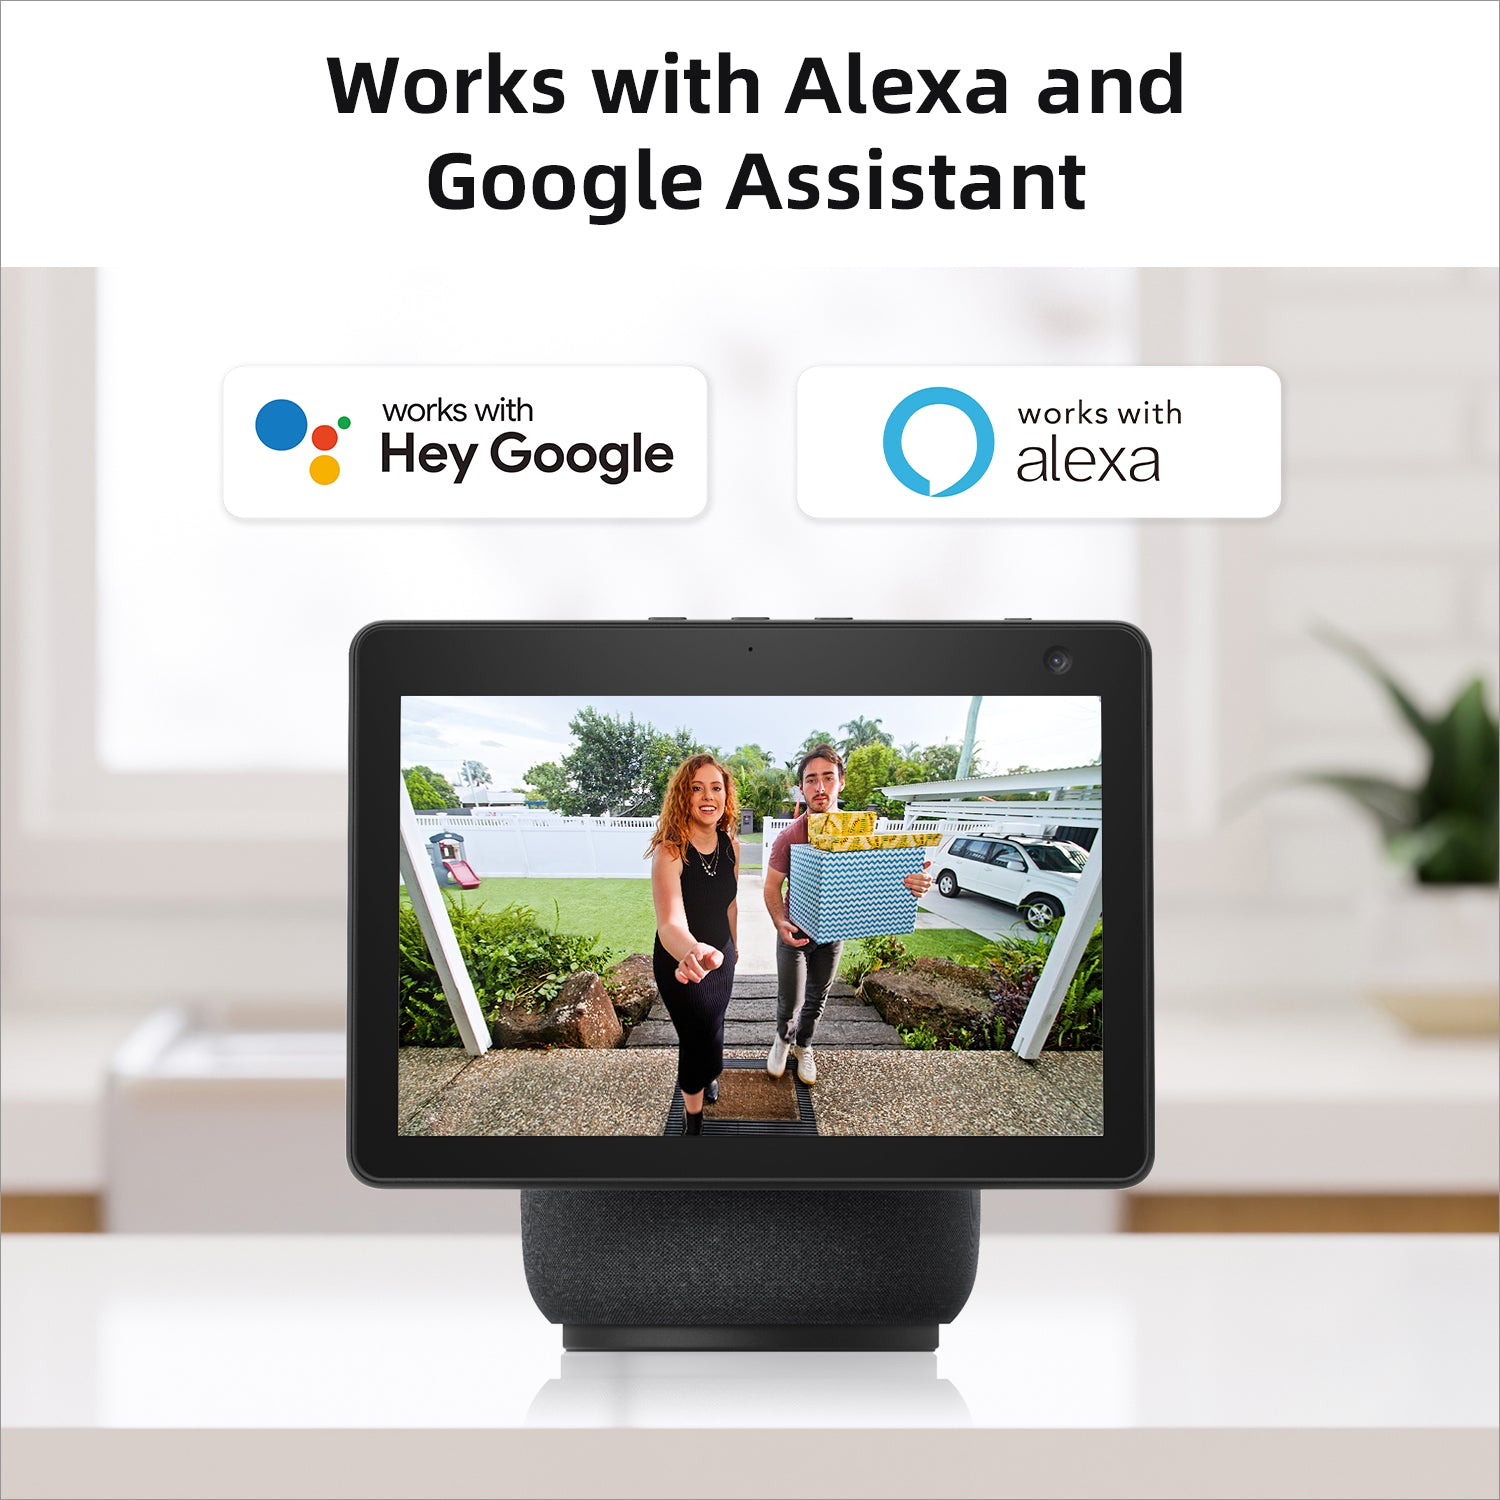 Works with Alexa and Google Assistant